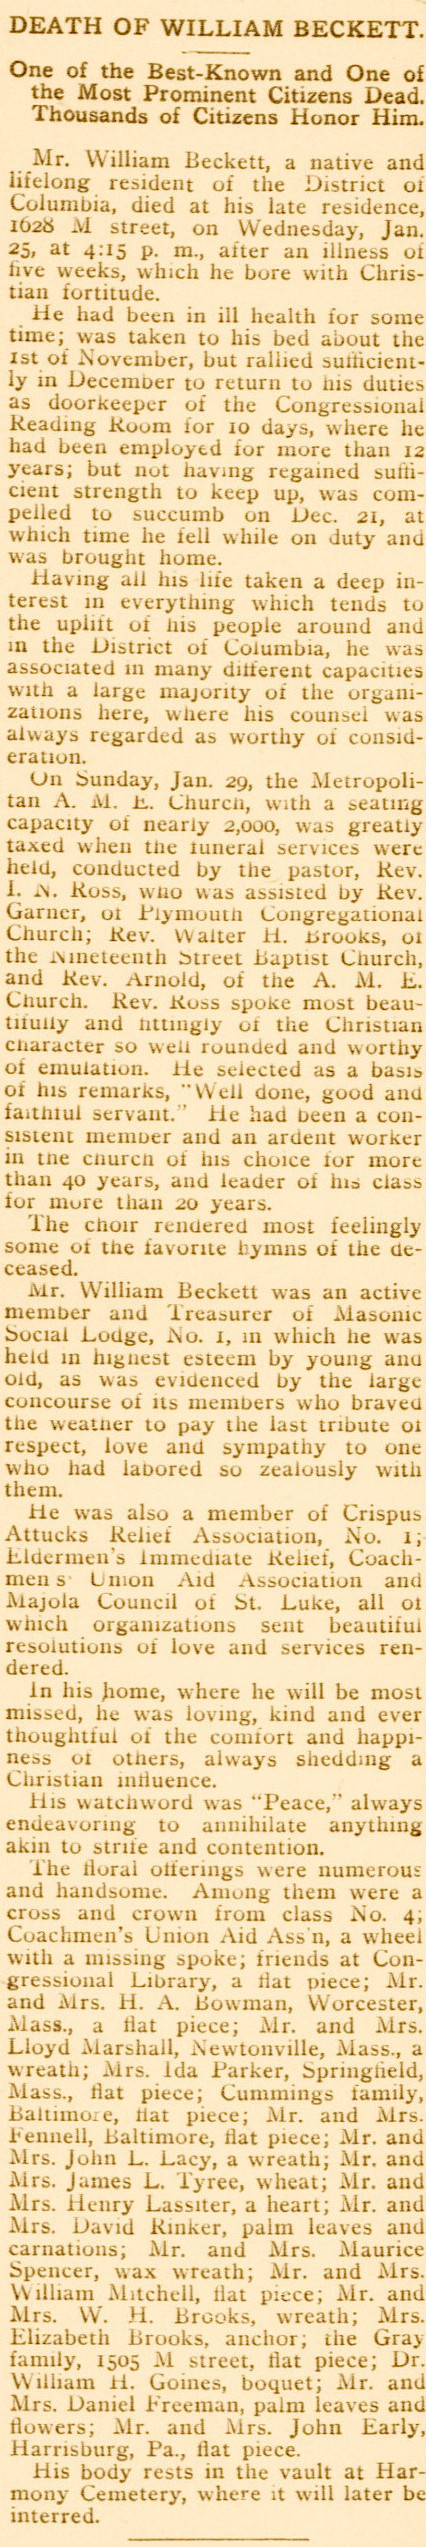 Newspaper clipping of obituary for William Beckett.